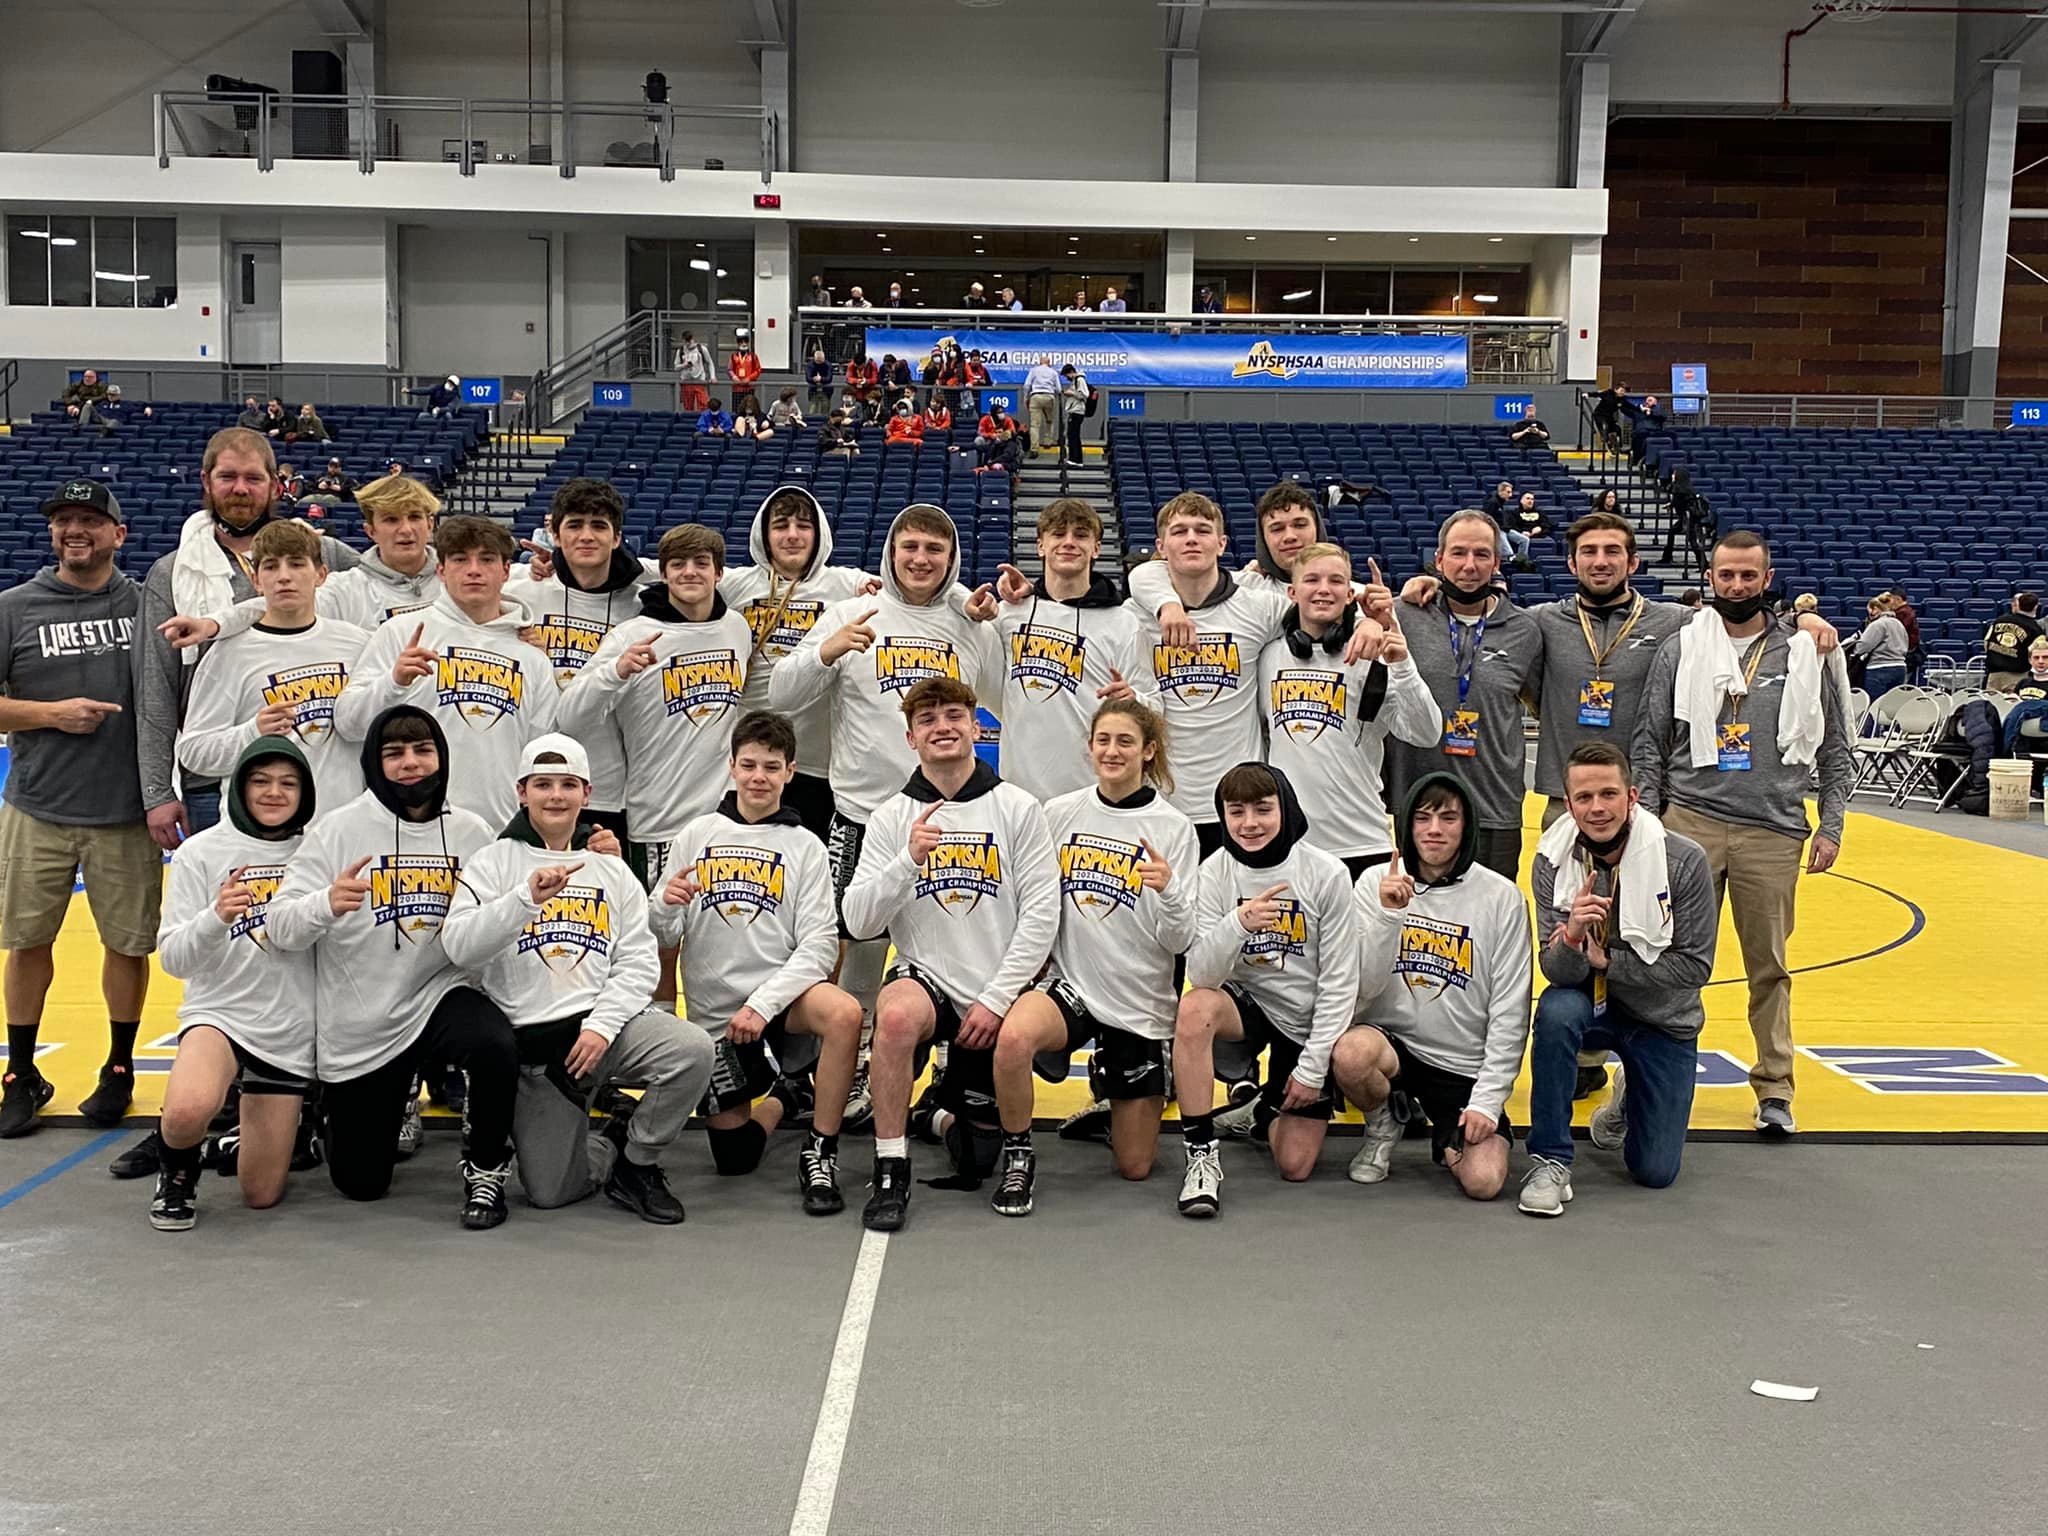 Minisink Valley Dominant in Winning NYS Duals Championship SECTION 9